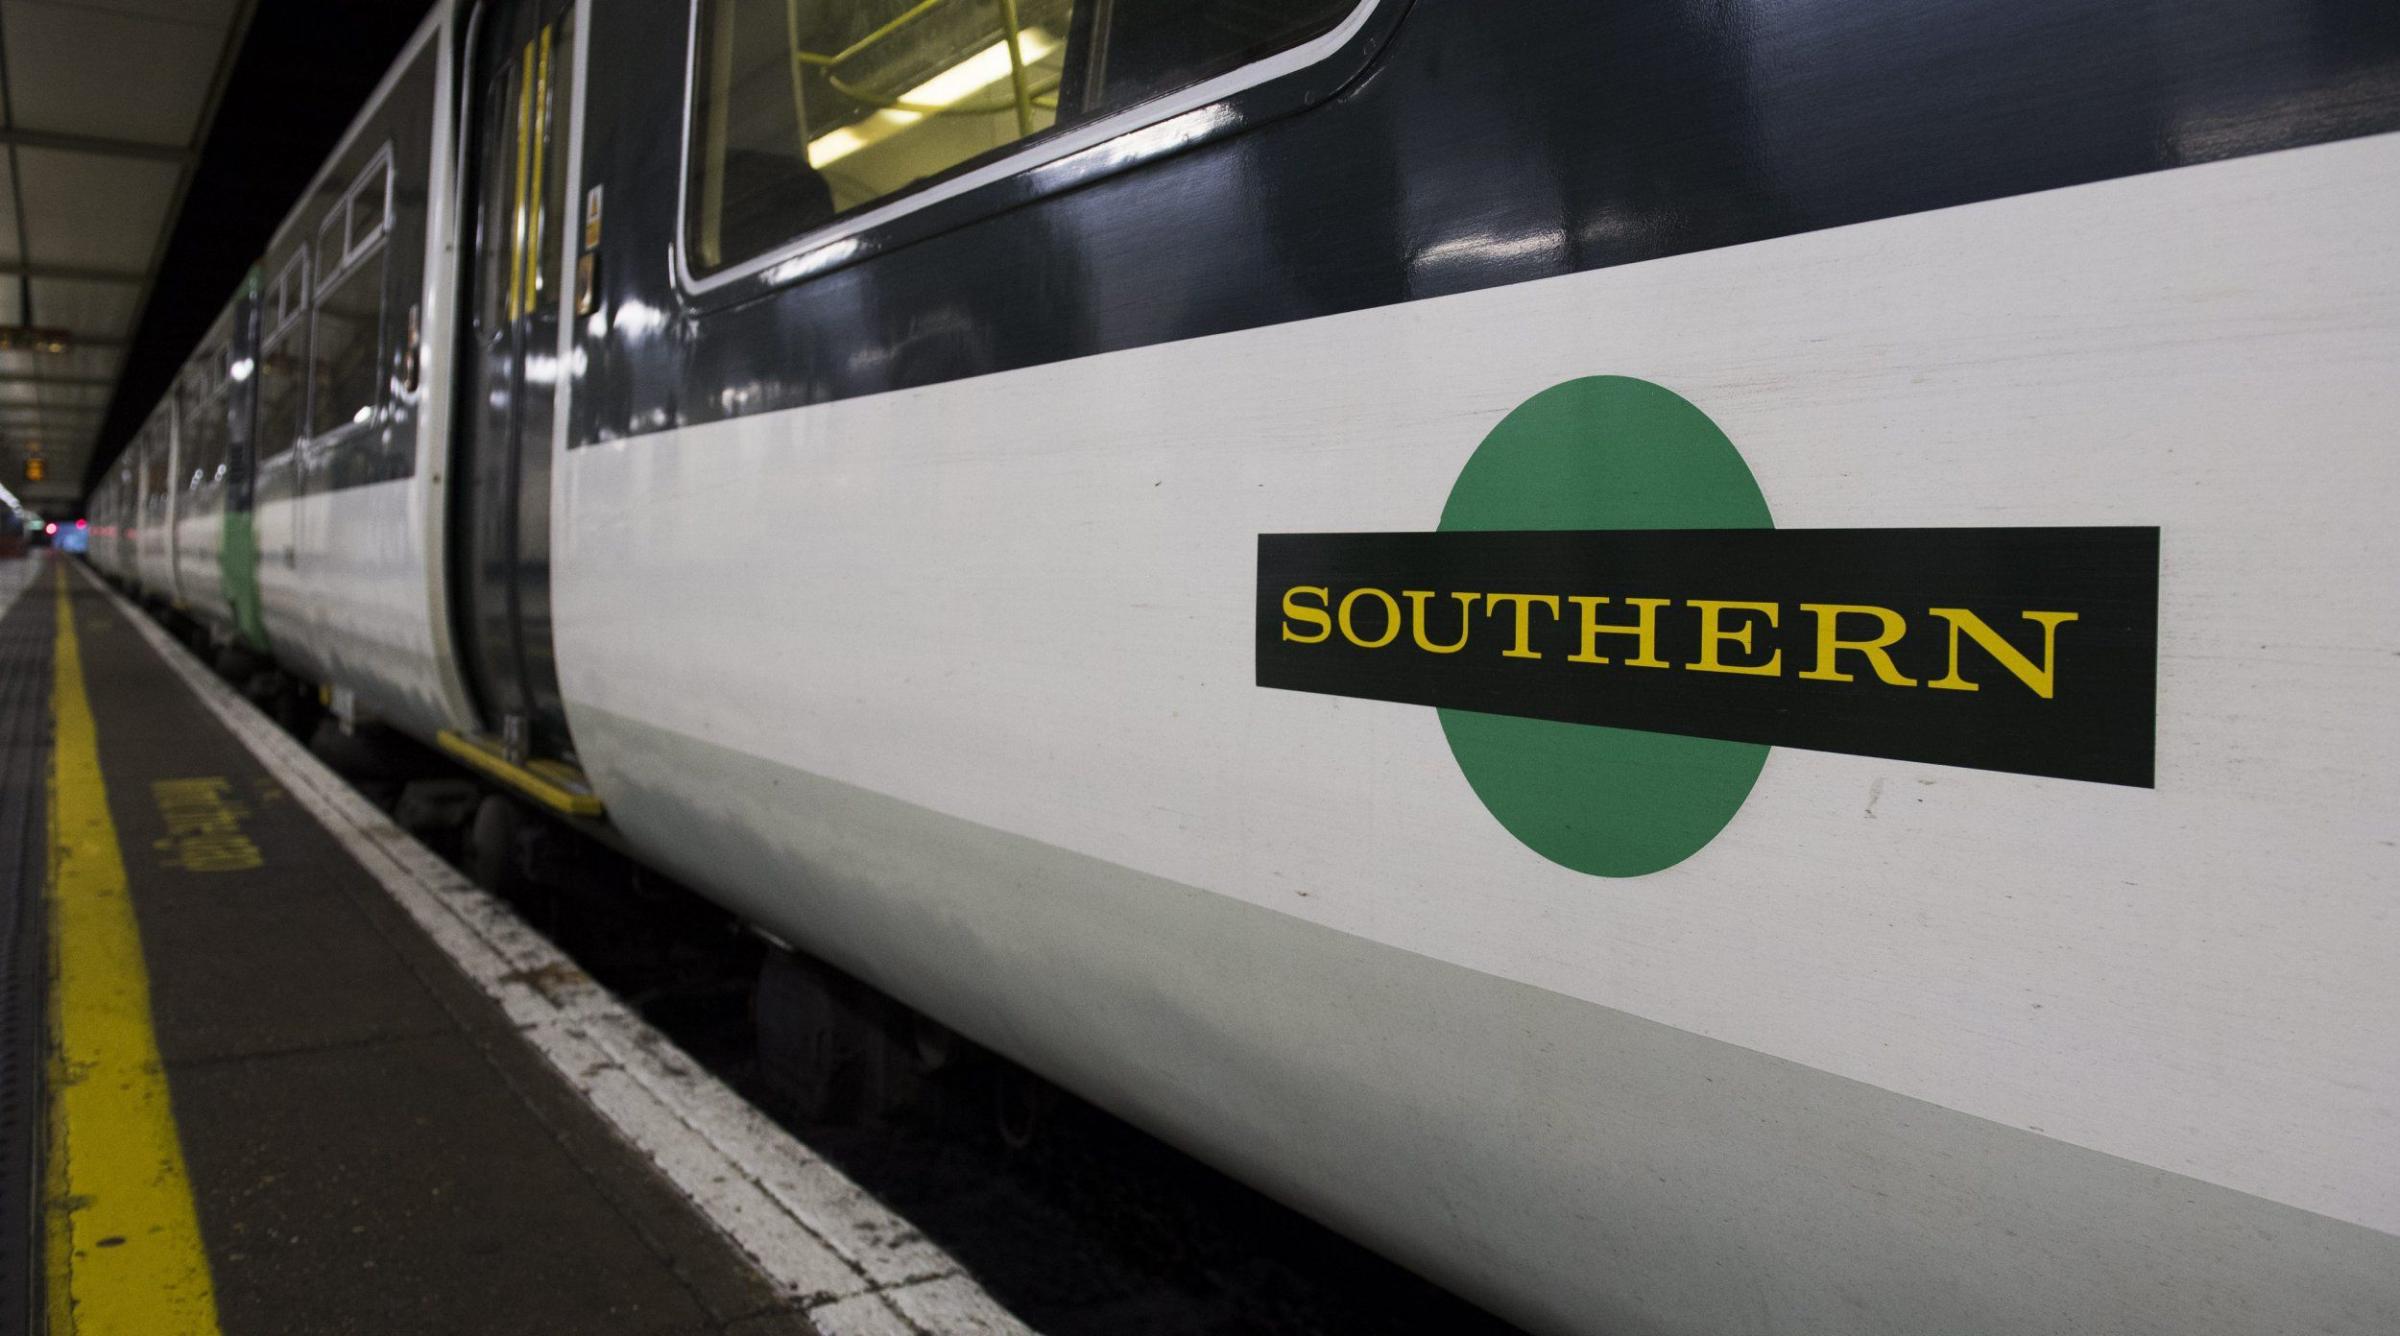 RMT votes for 24-hour strike on Southern rail trains - Harrow Times